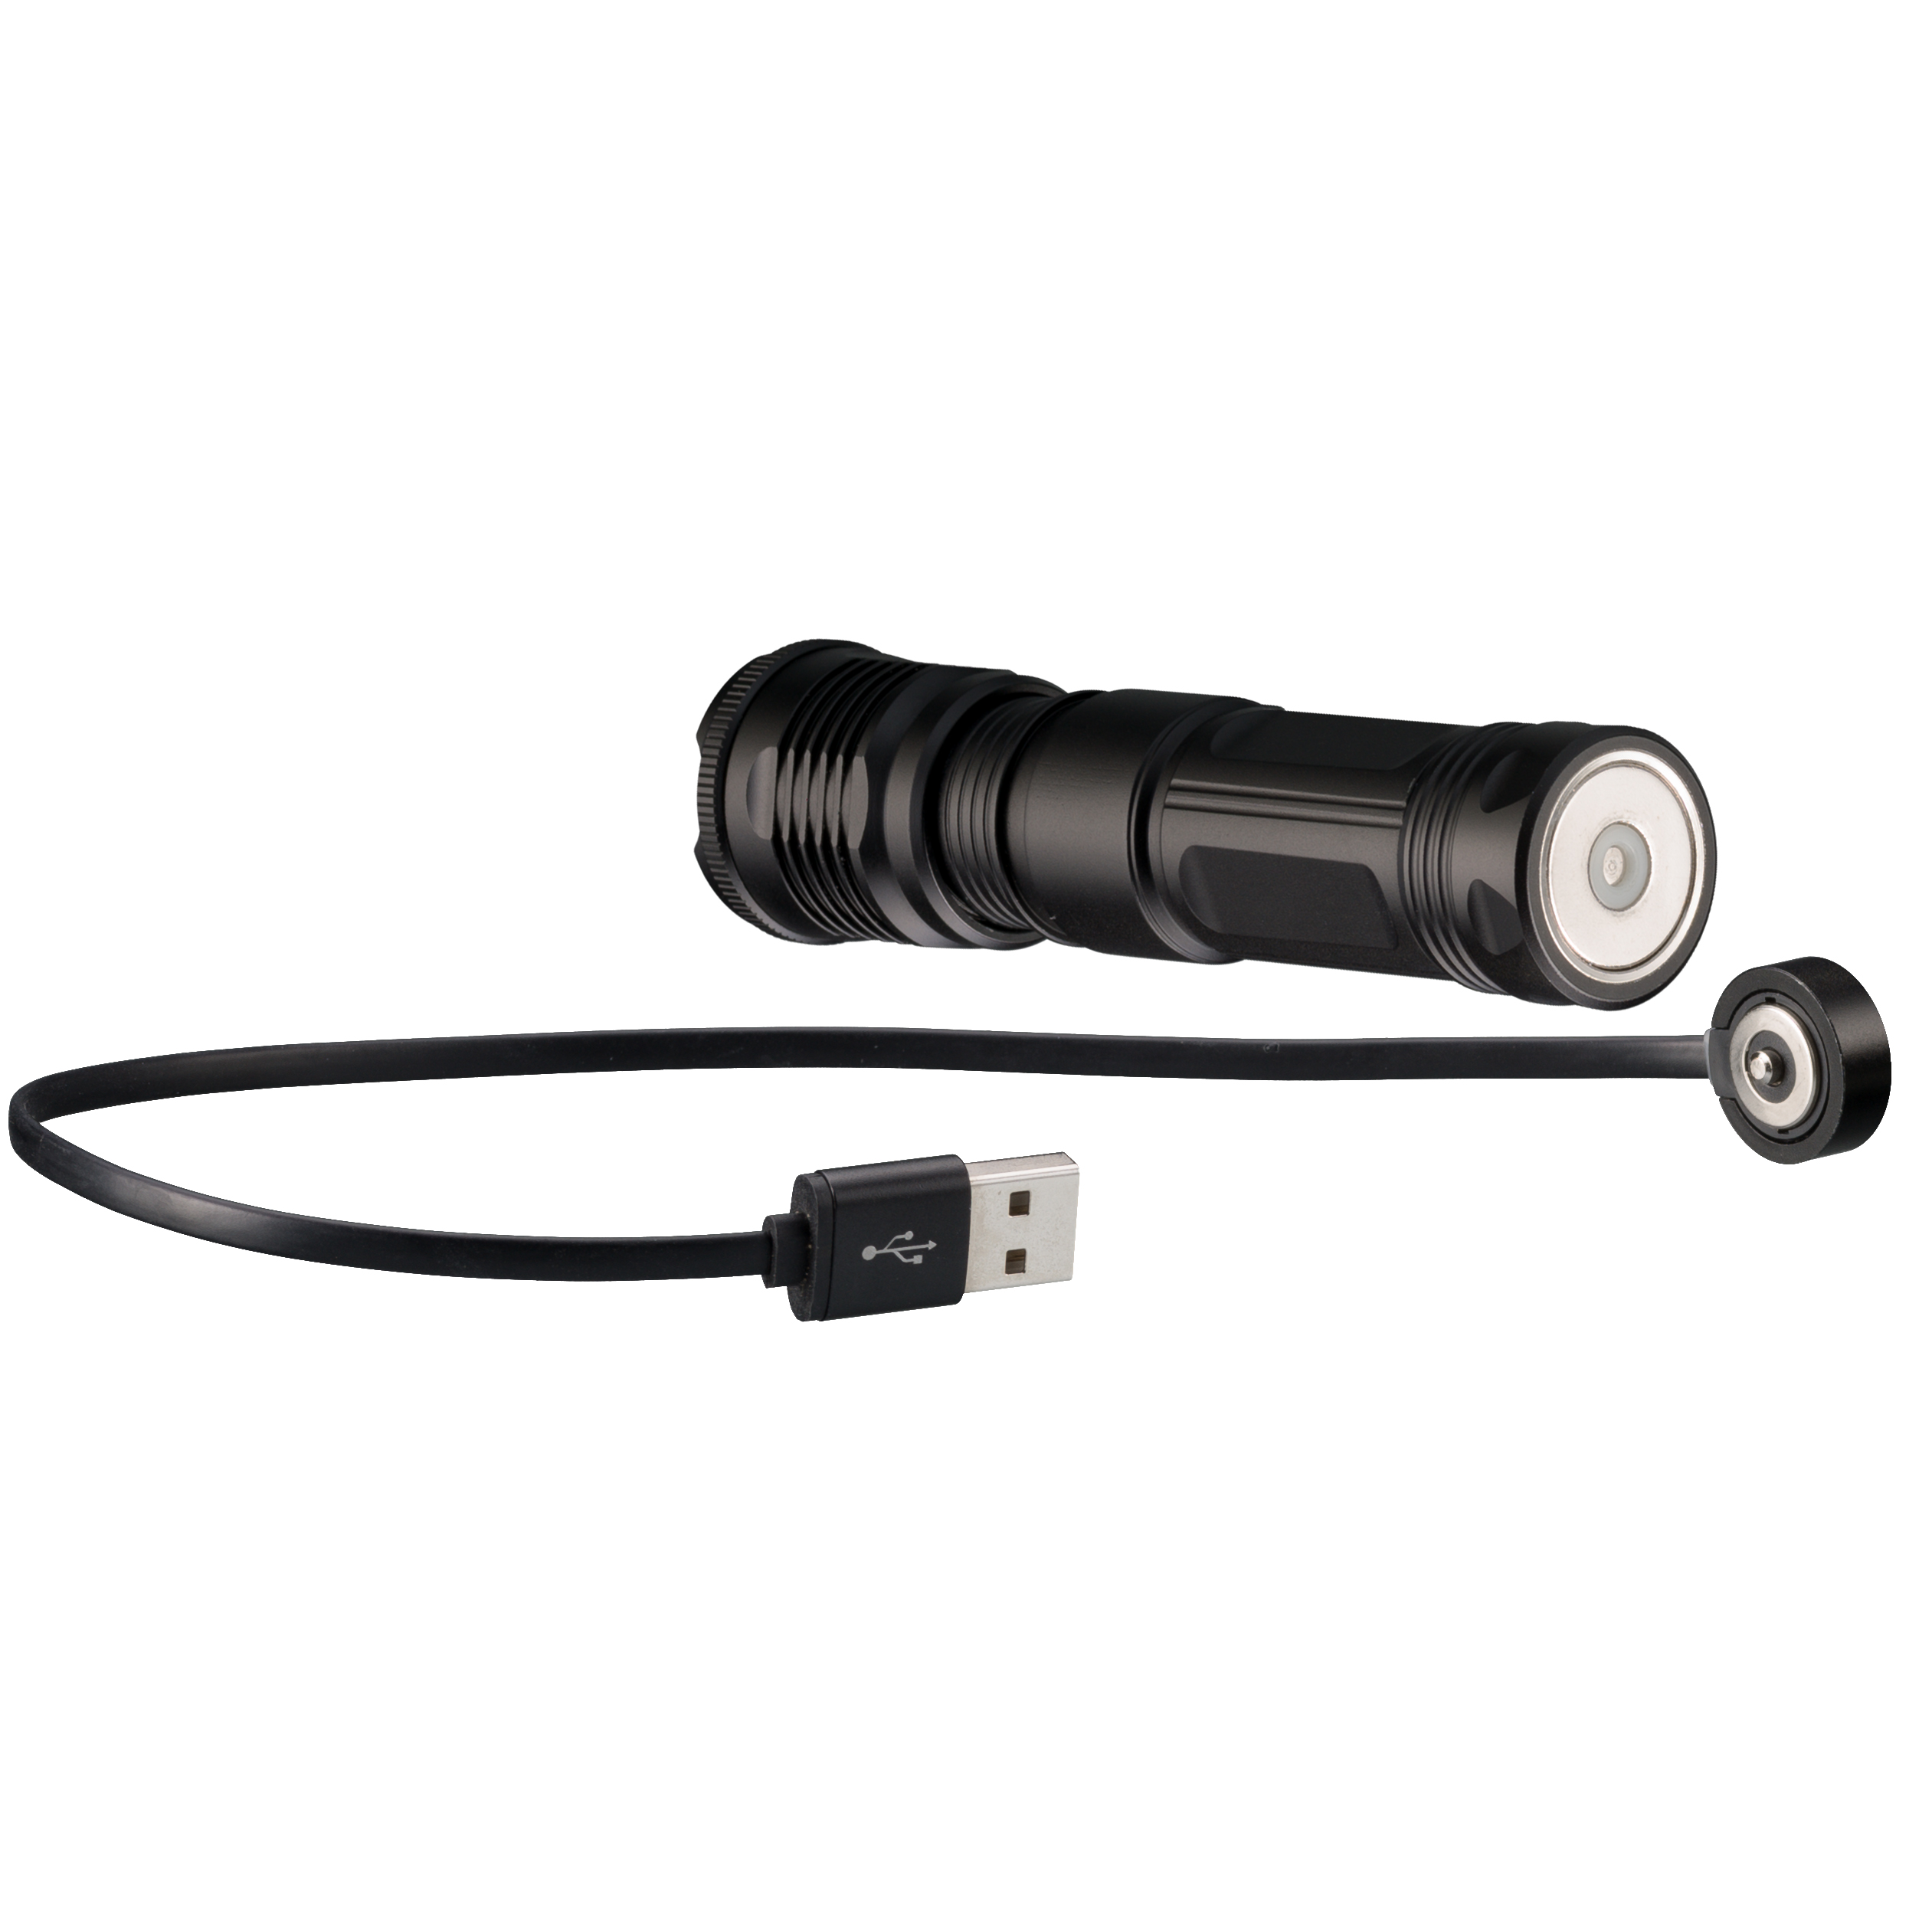 NATIONAL GEOGRAPHIC ILUMINOS 1000 LED Zoom-Taschenlampe 1000 lm